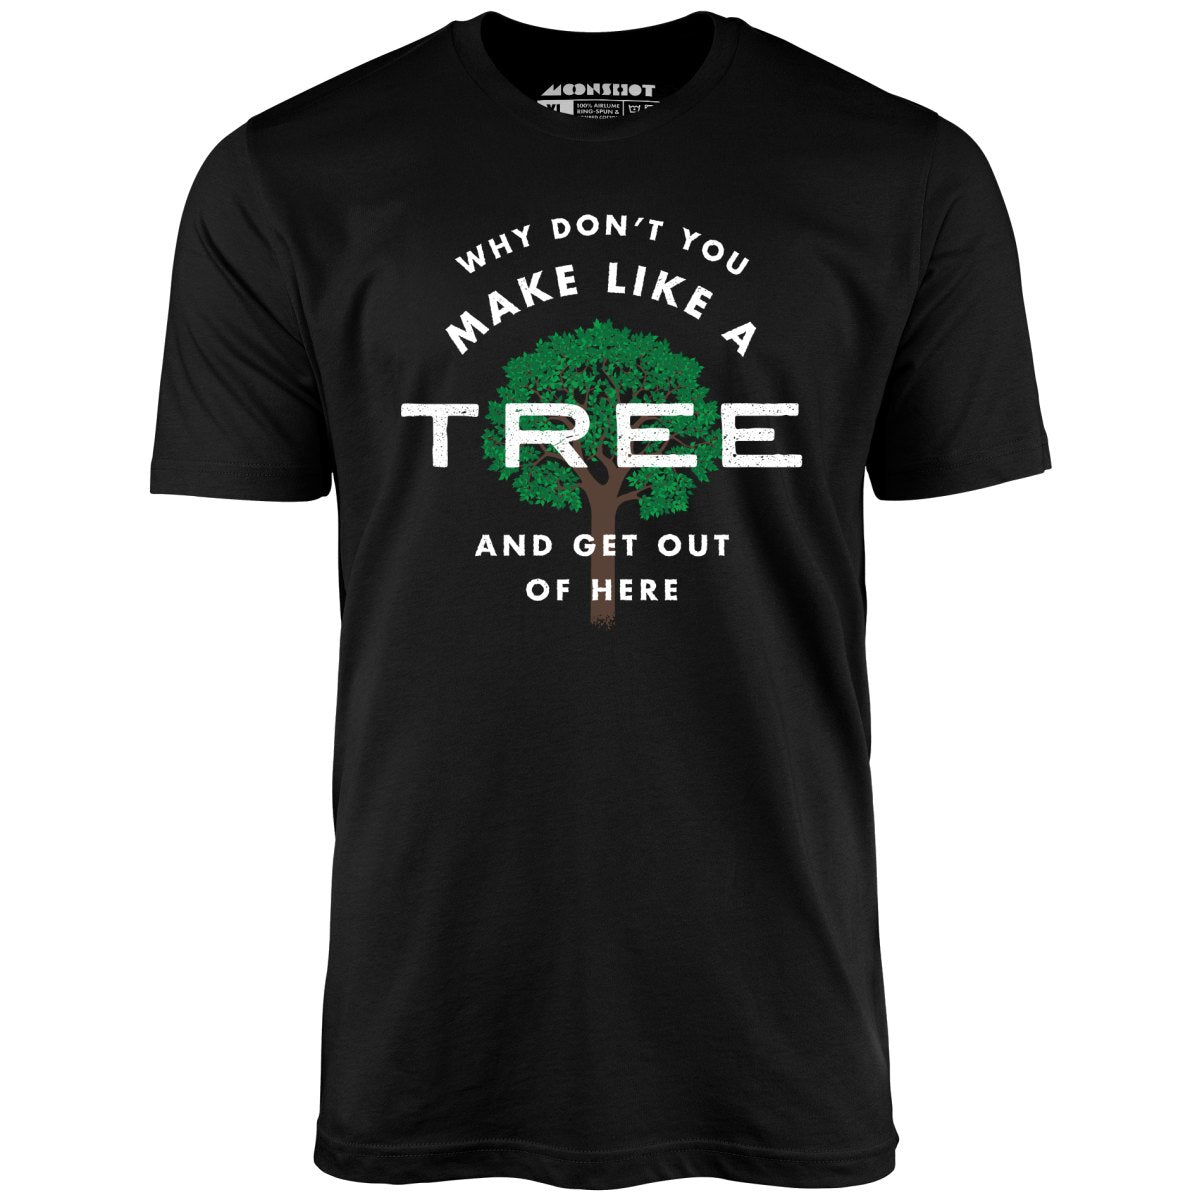 Why Don't You Make Like a Tree and Get Out of Here - Unisex T-Shirt